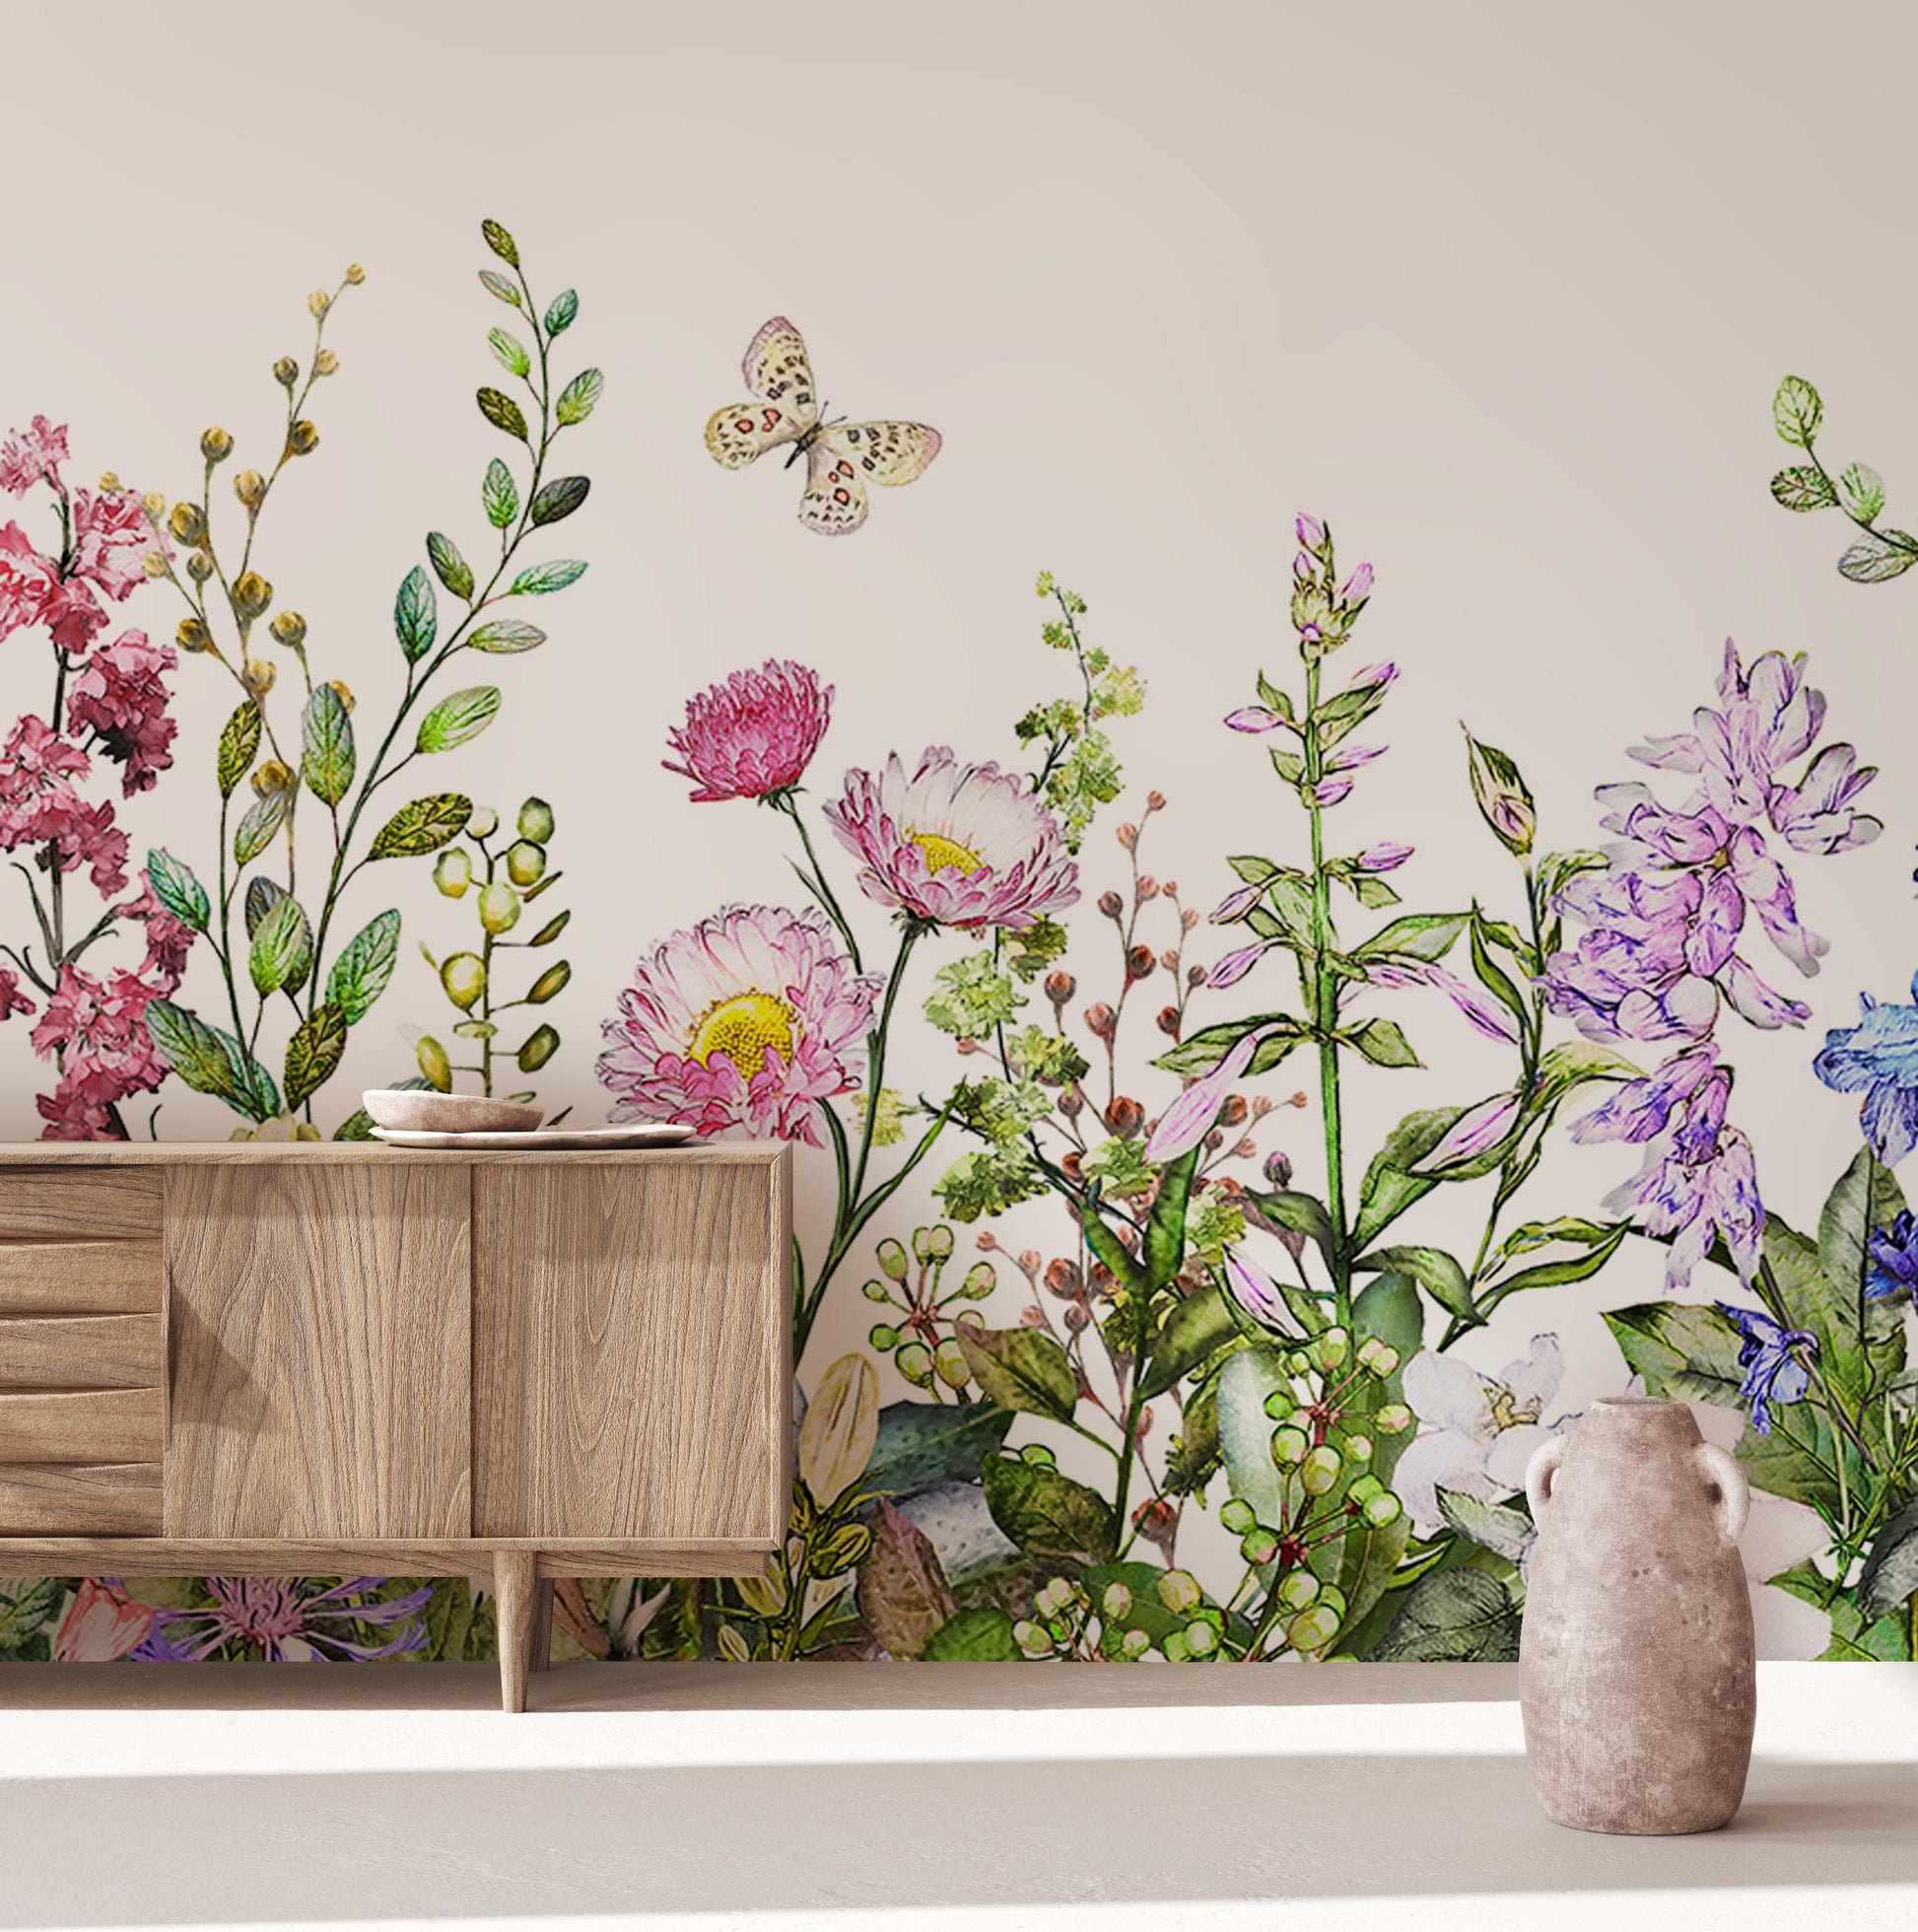 Wallpaper with a delicate floral meadow design for the living room decor